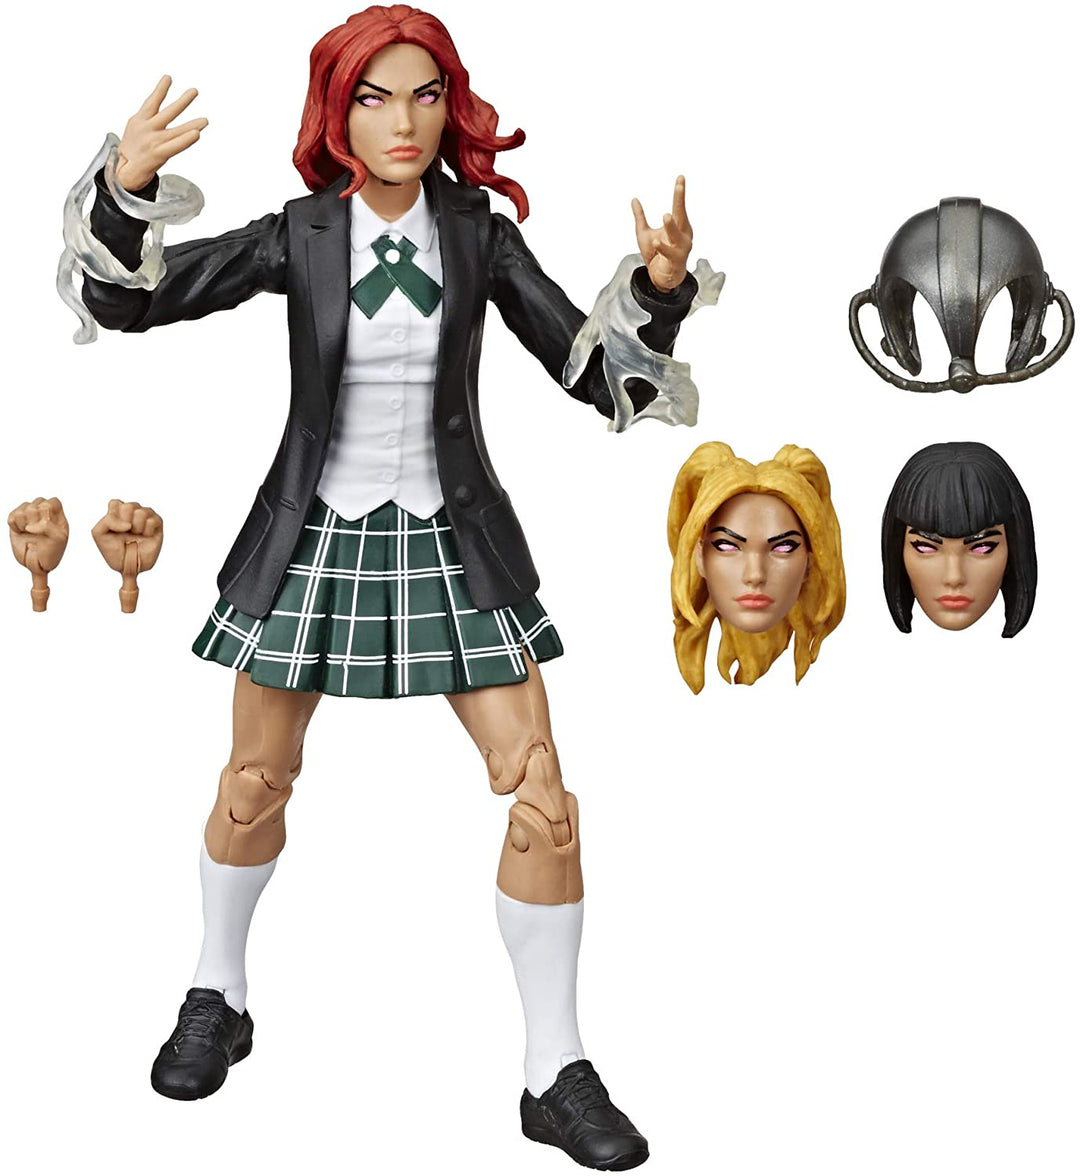 Hasbro Marvel Legends Series 6-inch Collectible Action Figure Stepford Cuckoos Toy